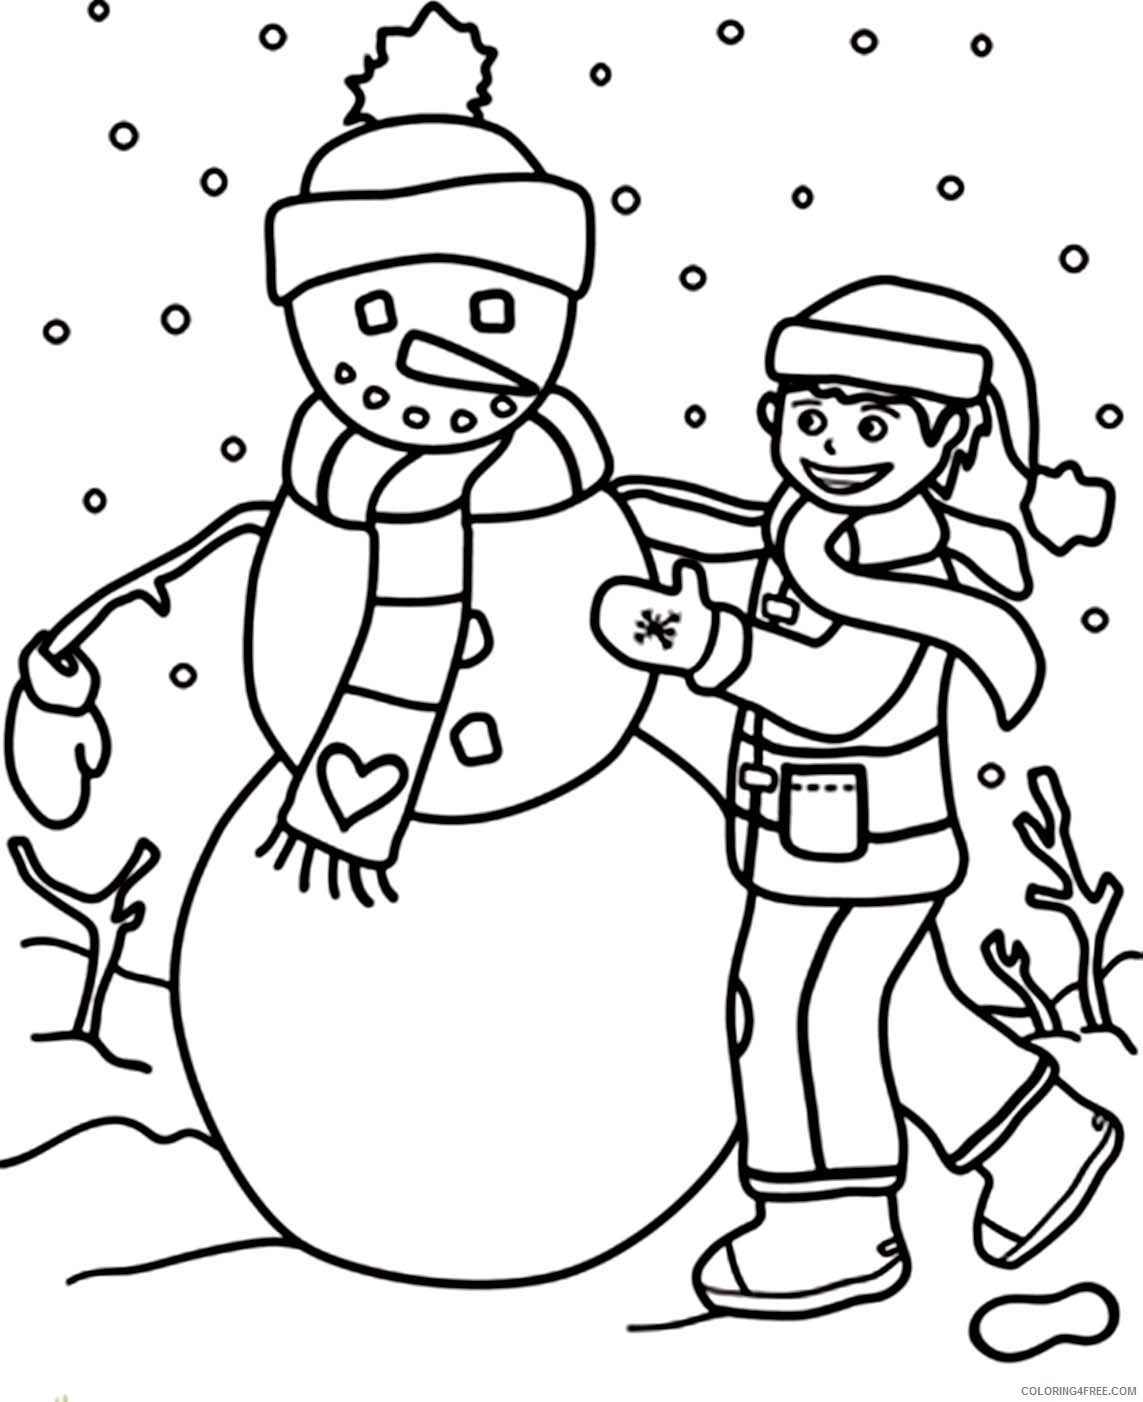 making a snowman coloring pages Coloring4free